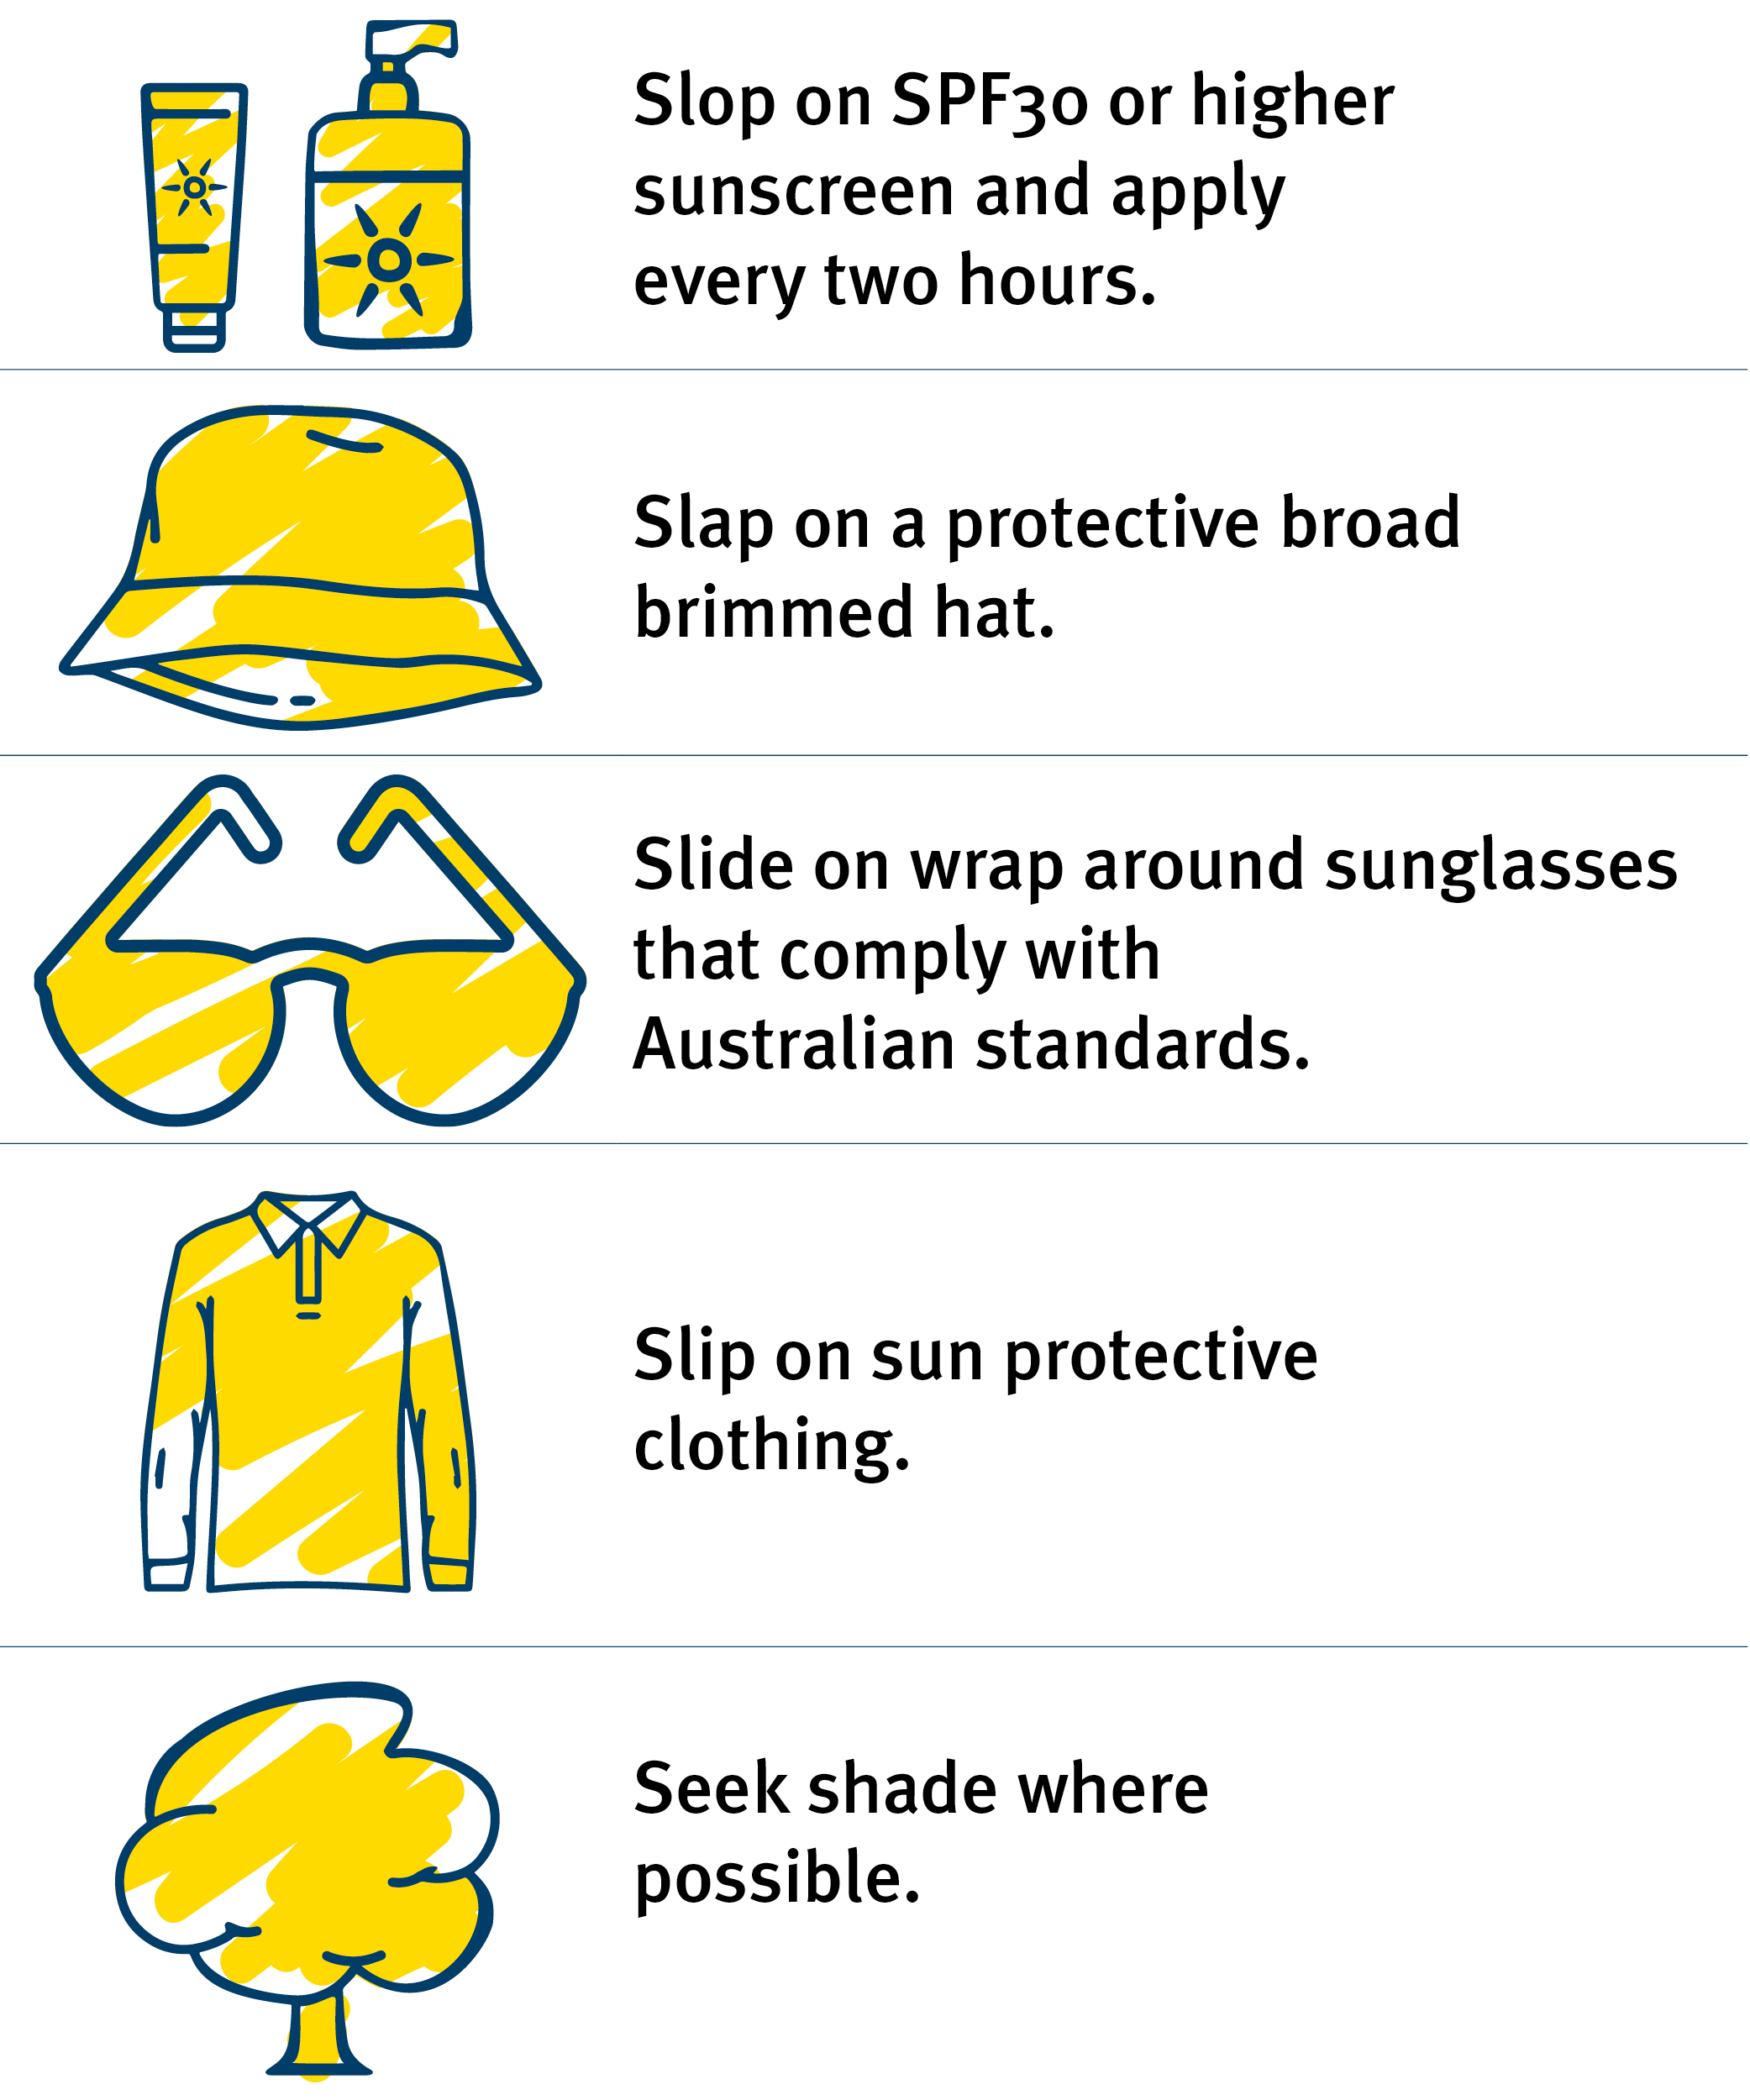 Be SunSmart every day